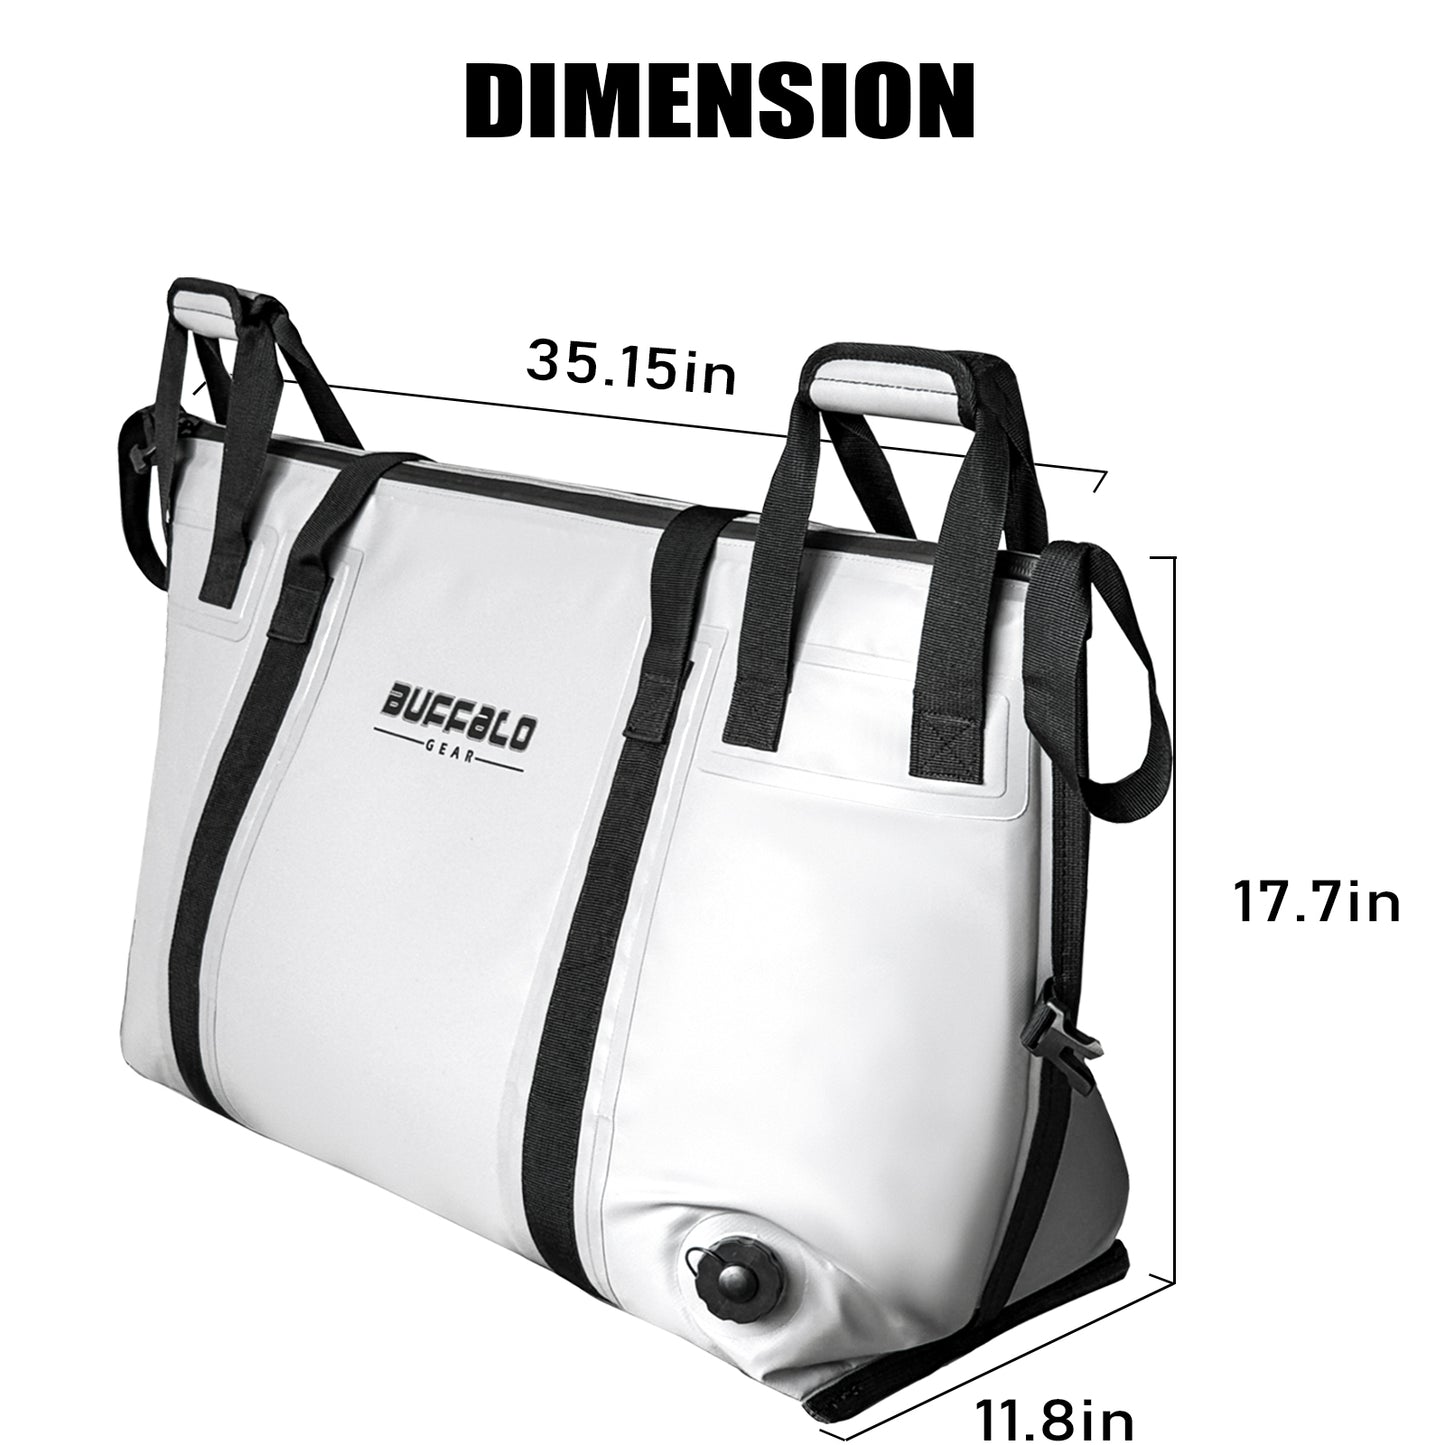 55L Insulated Fish Cooler Bag With Flat Bottom - Buffalo Gear 